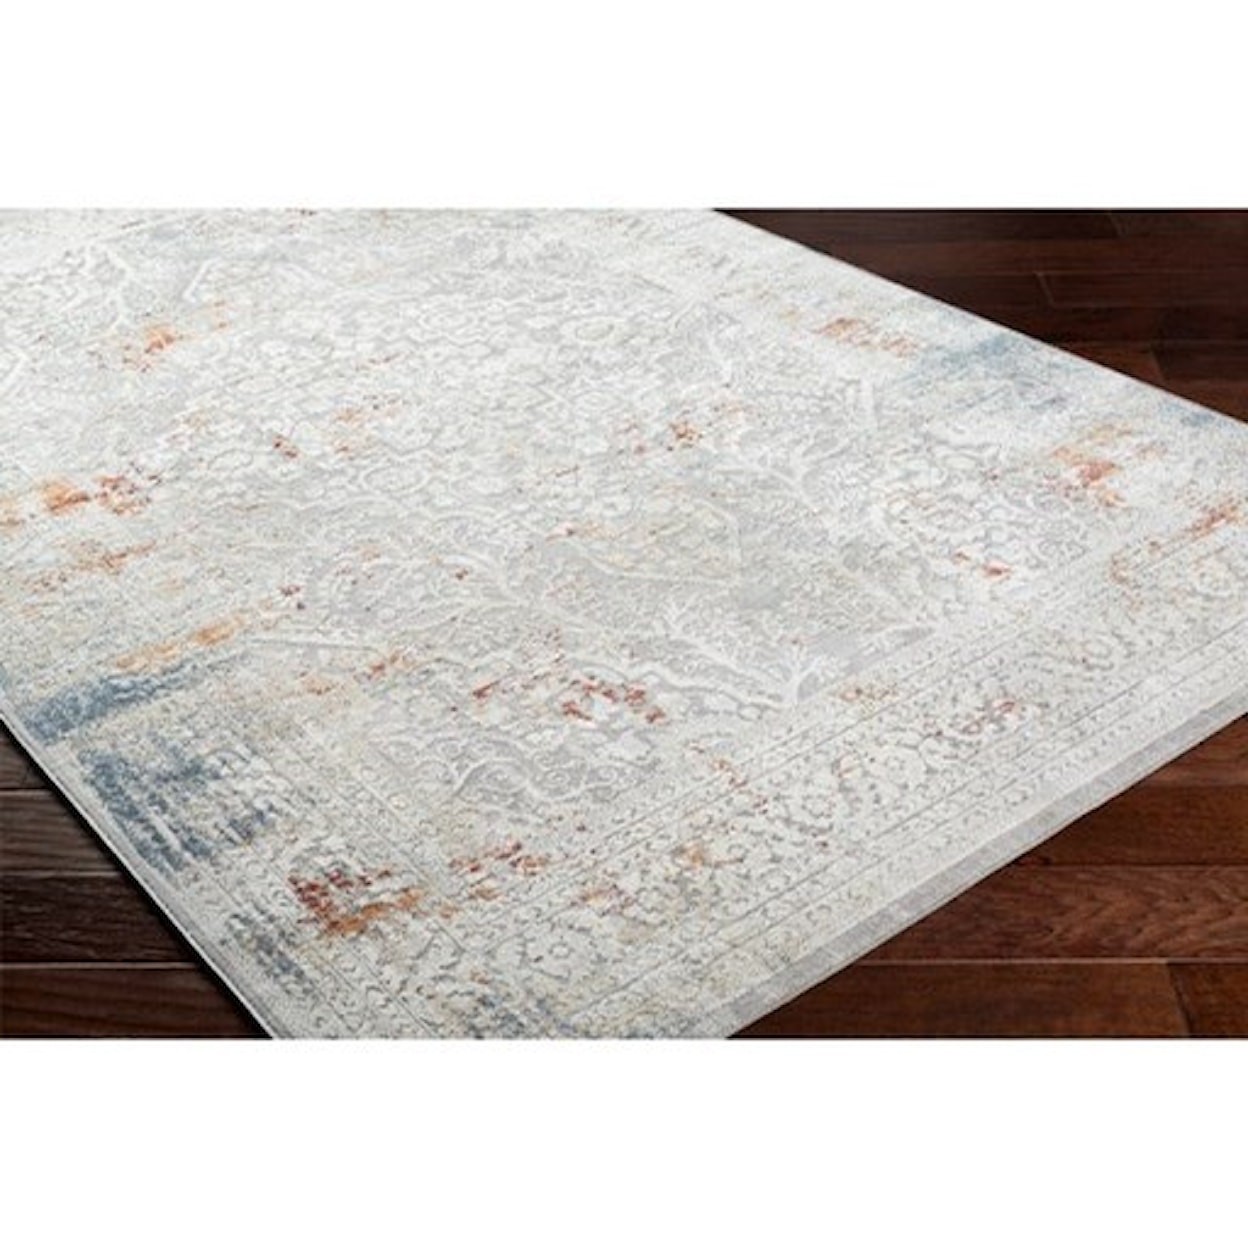 Ruby-Gordon Accents Norland 2'7" x 4' Rug